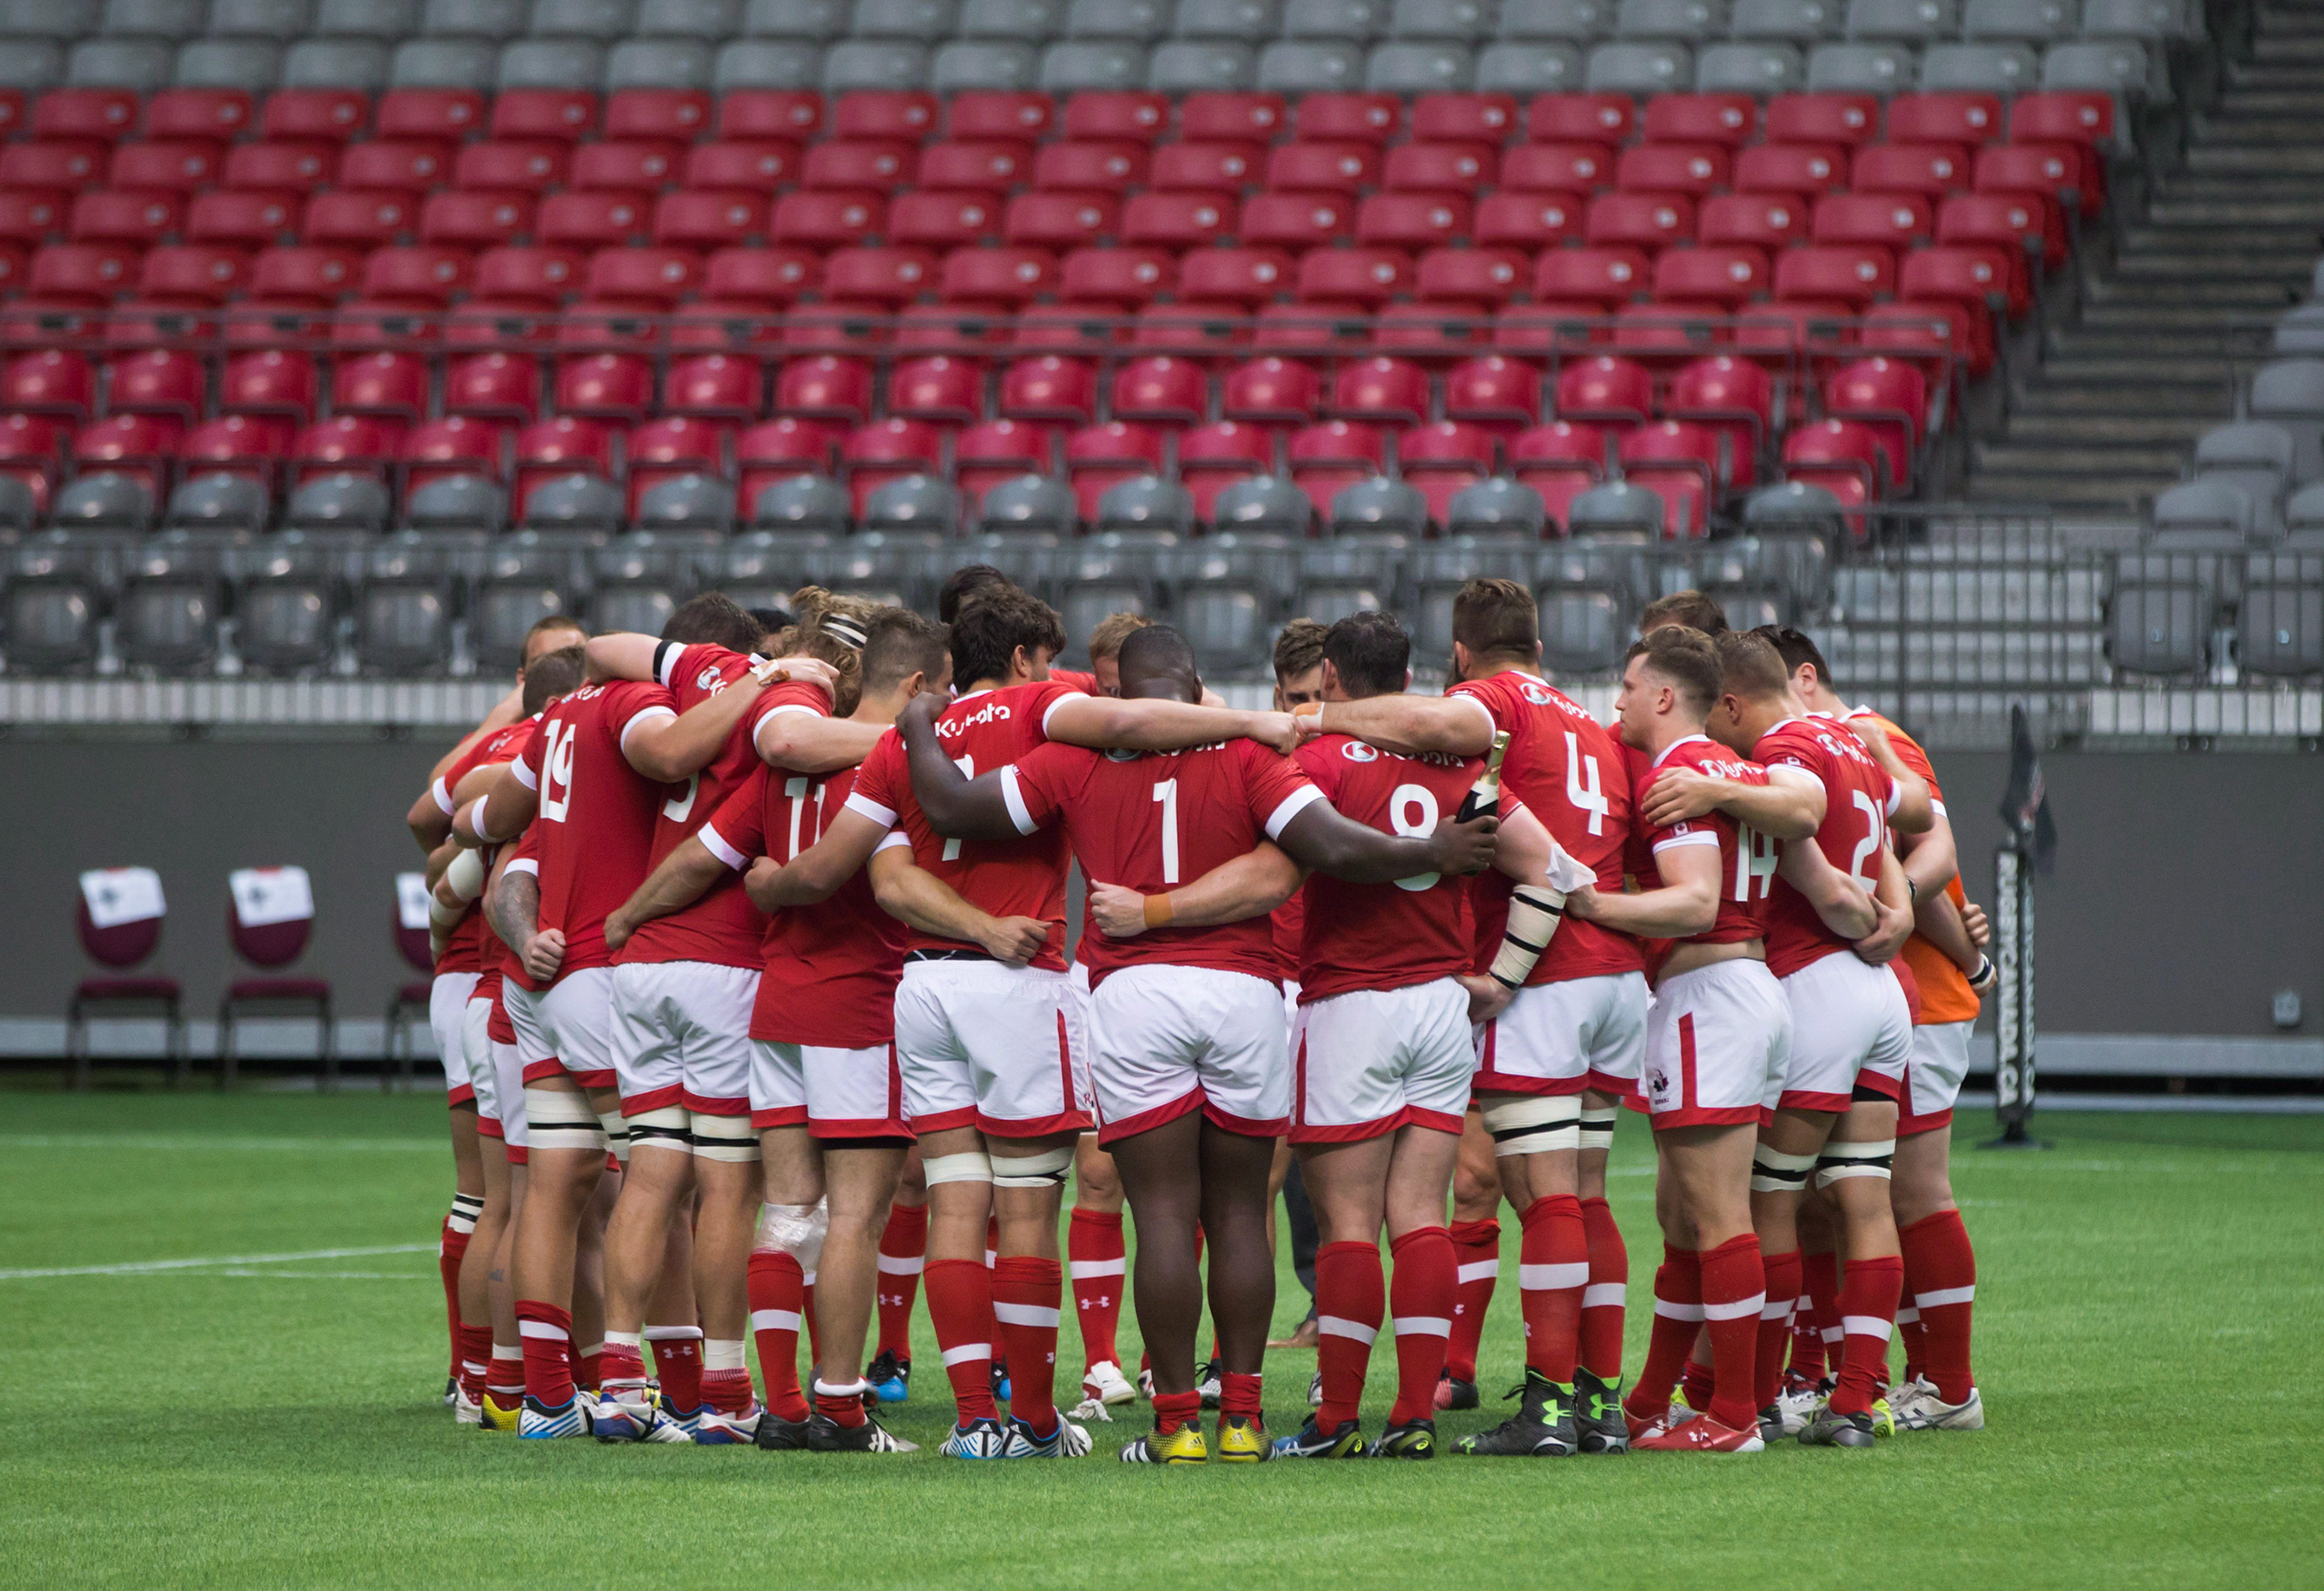 Canada players gather together after losing to Japan during a rugby test match in Vancouver, B.C., on Saturday June 11, 2016. THE CANADIAN PRESS/Darryl Dyck